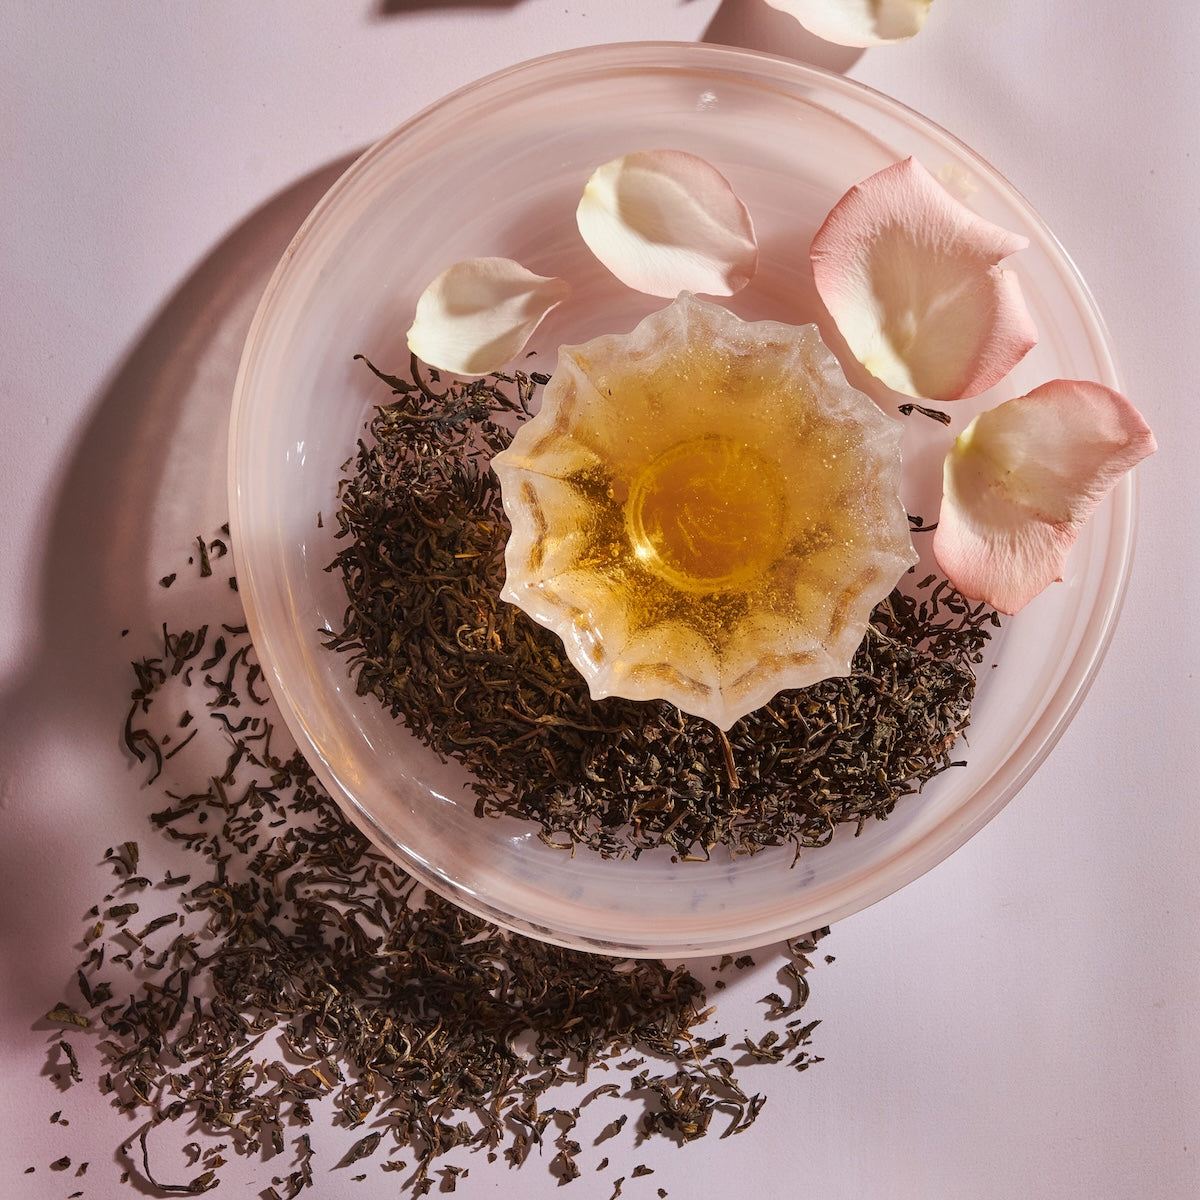 A glass bowl filled with loose Magic Hour Jasmine Yin Hao Green Tea and a scoop of honey sits on a light pink surface. Rose petals are arranged around the bowl, creating an elegant and soothing composition. The setup is bathed in soft, natural light.